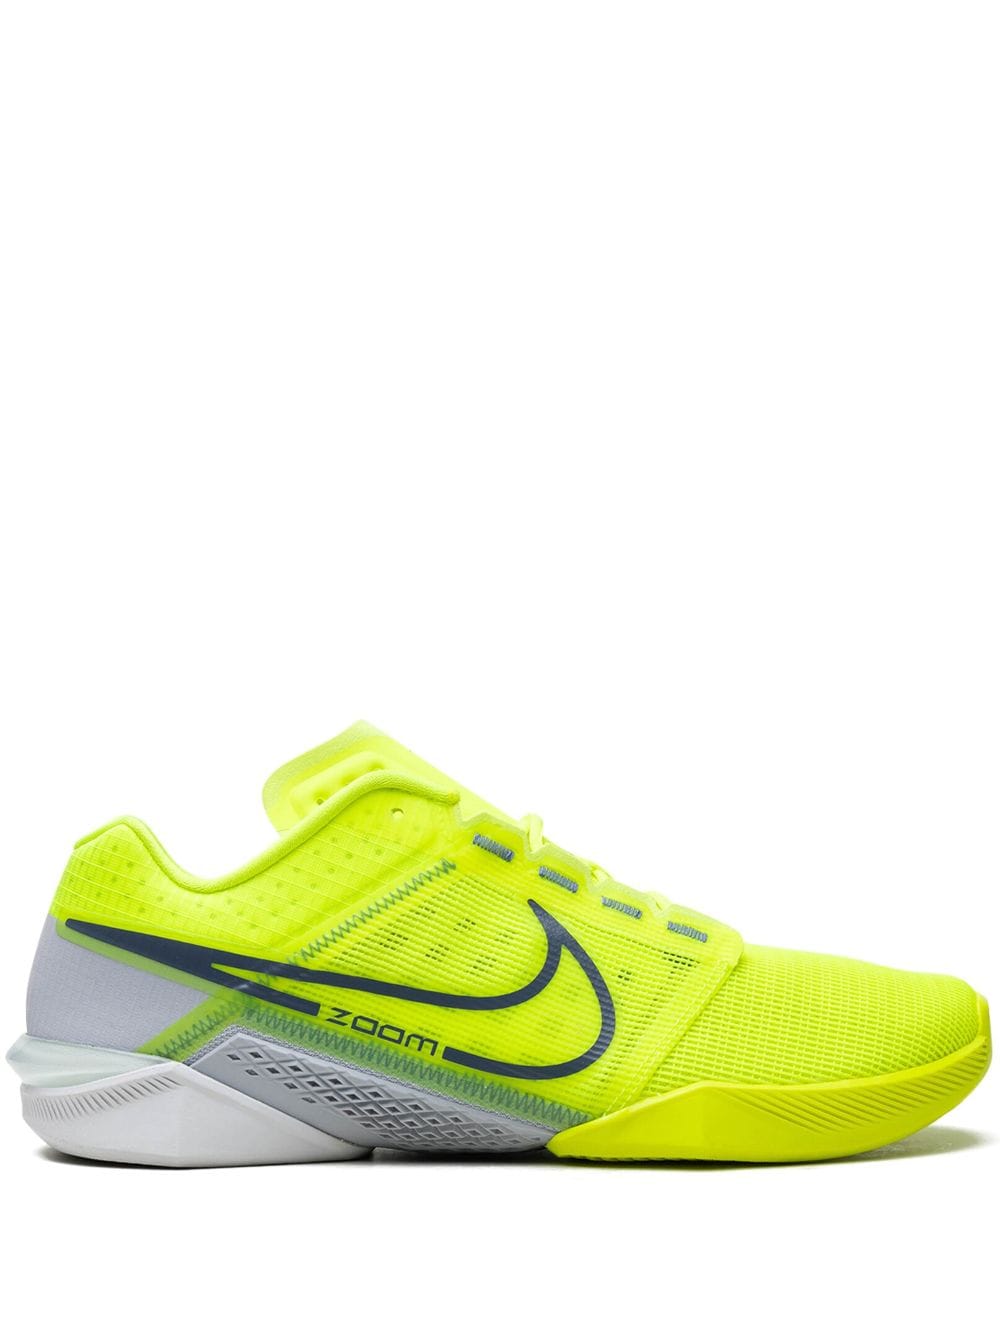 Nike Zoom Metcon Turbo 2 "Volt/Diffused Blue" sneakers - Green von Nike